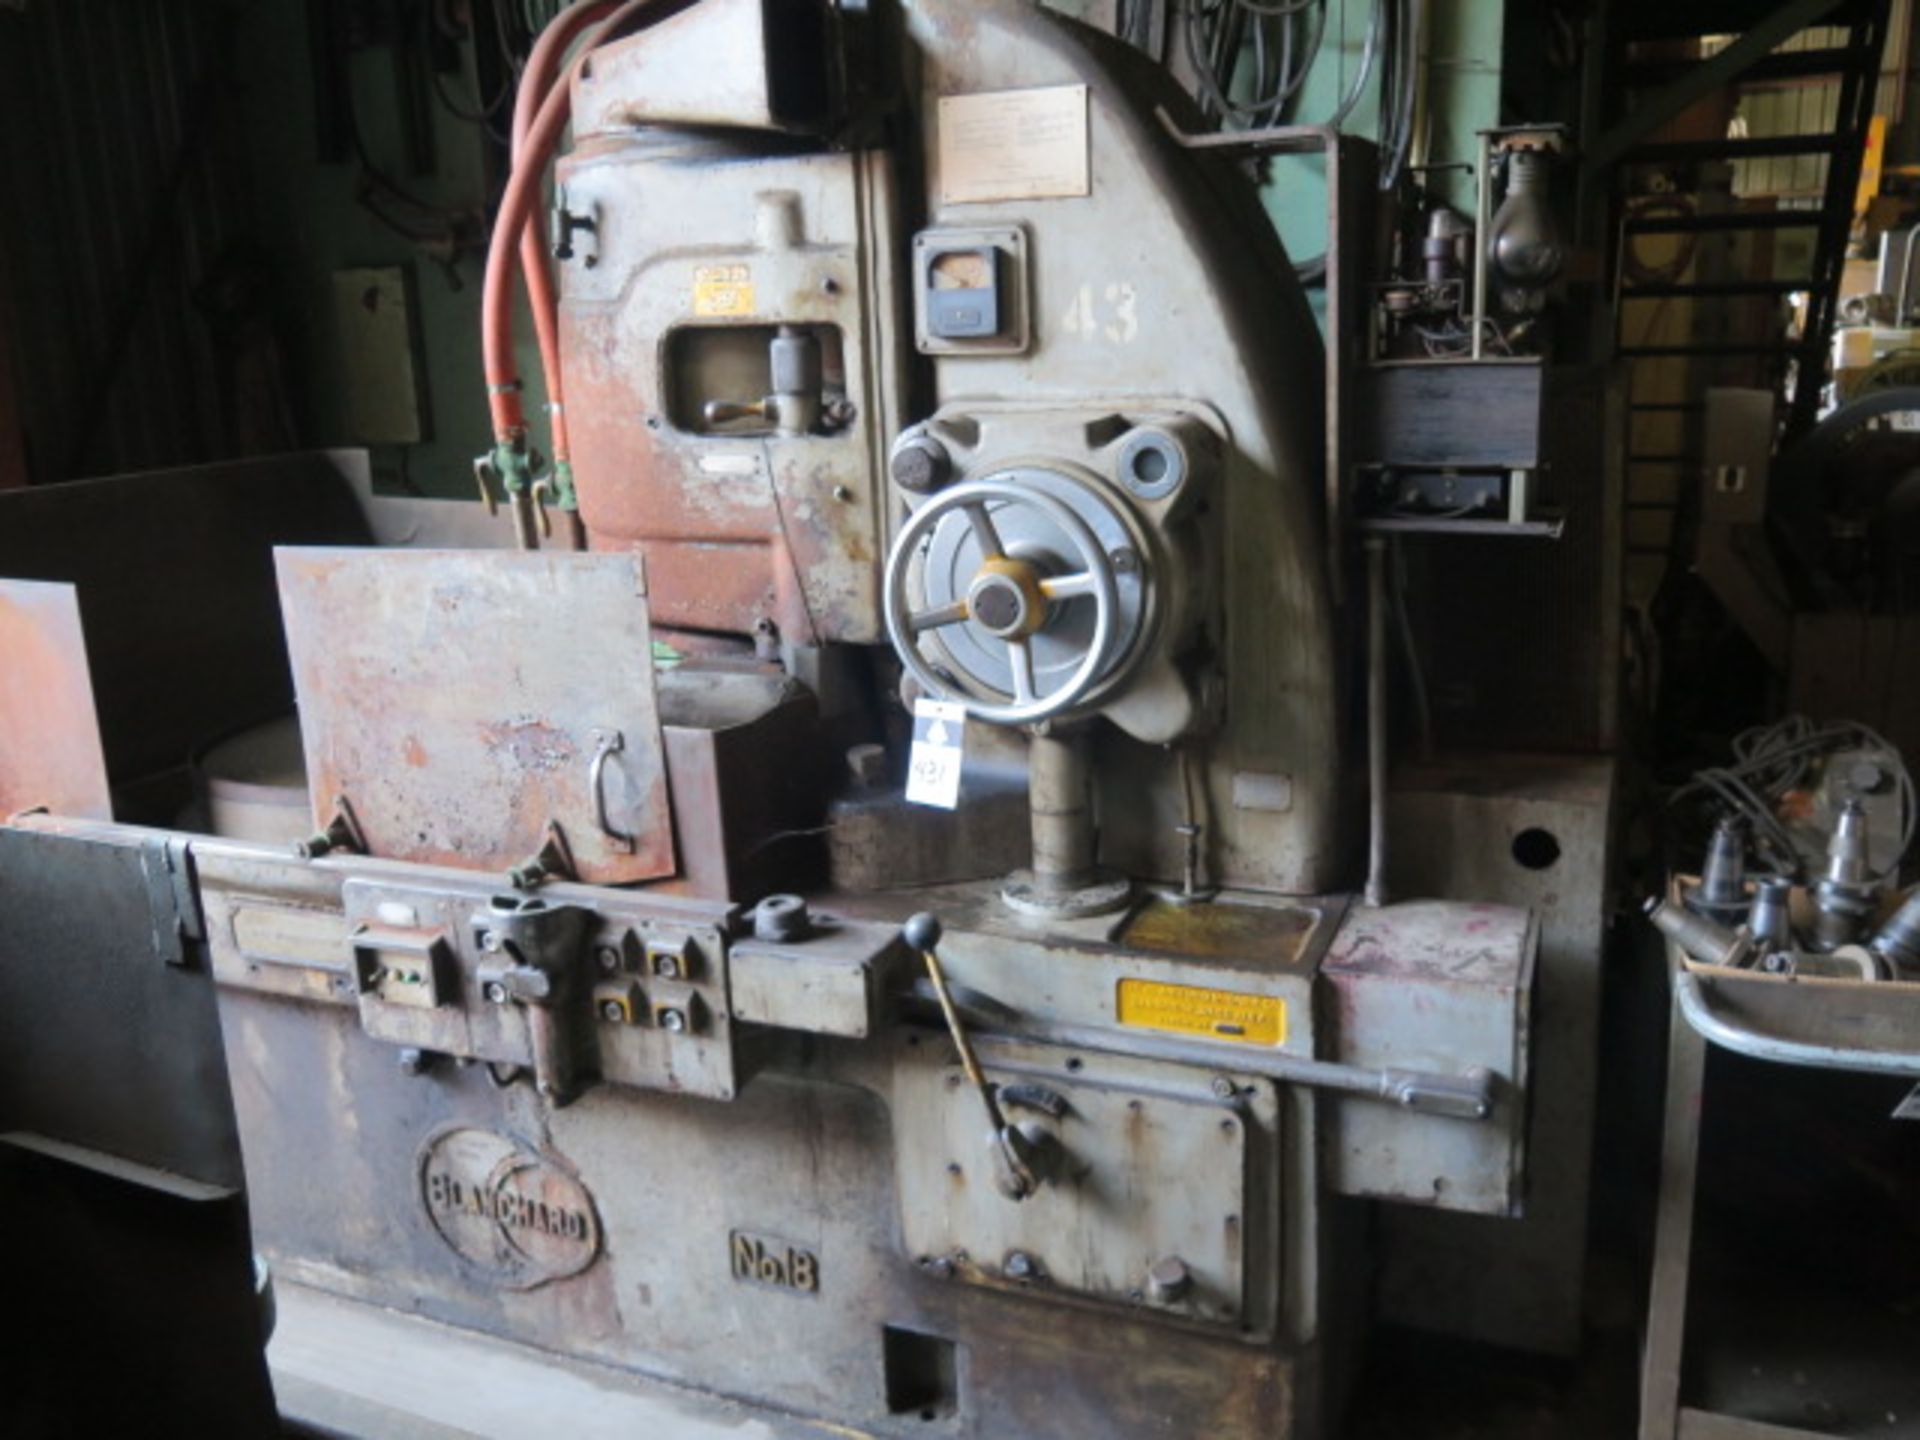 Blanchard No. 18 Rotary Surface Grinder s/n 7907 w/ 30” Magnetic Chuck, 18” Grinding Head,SOLD AS IS